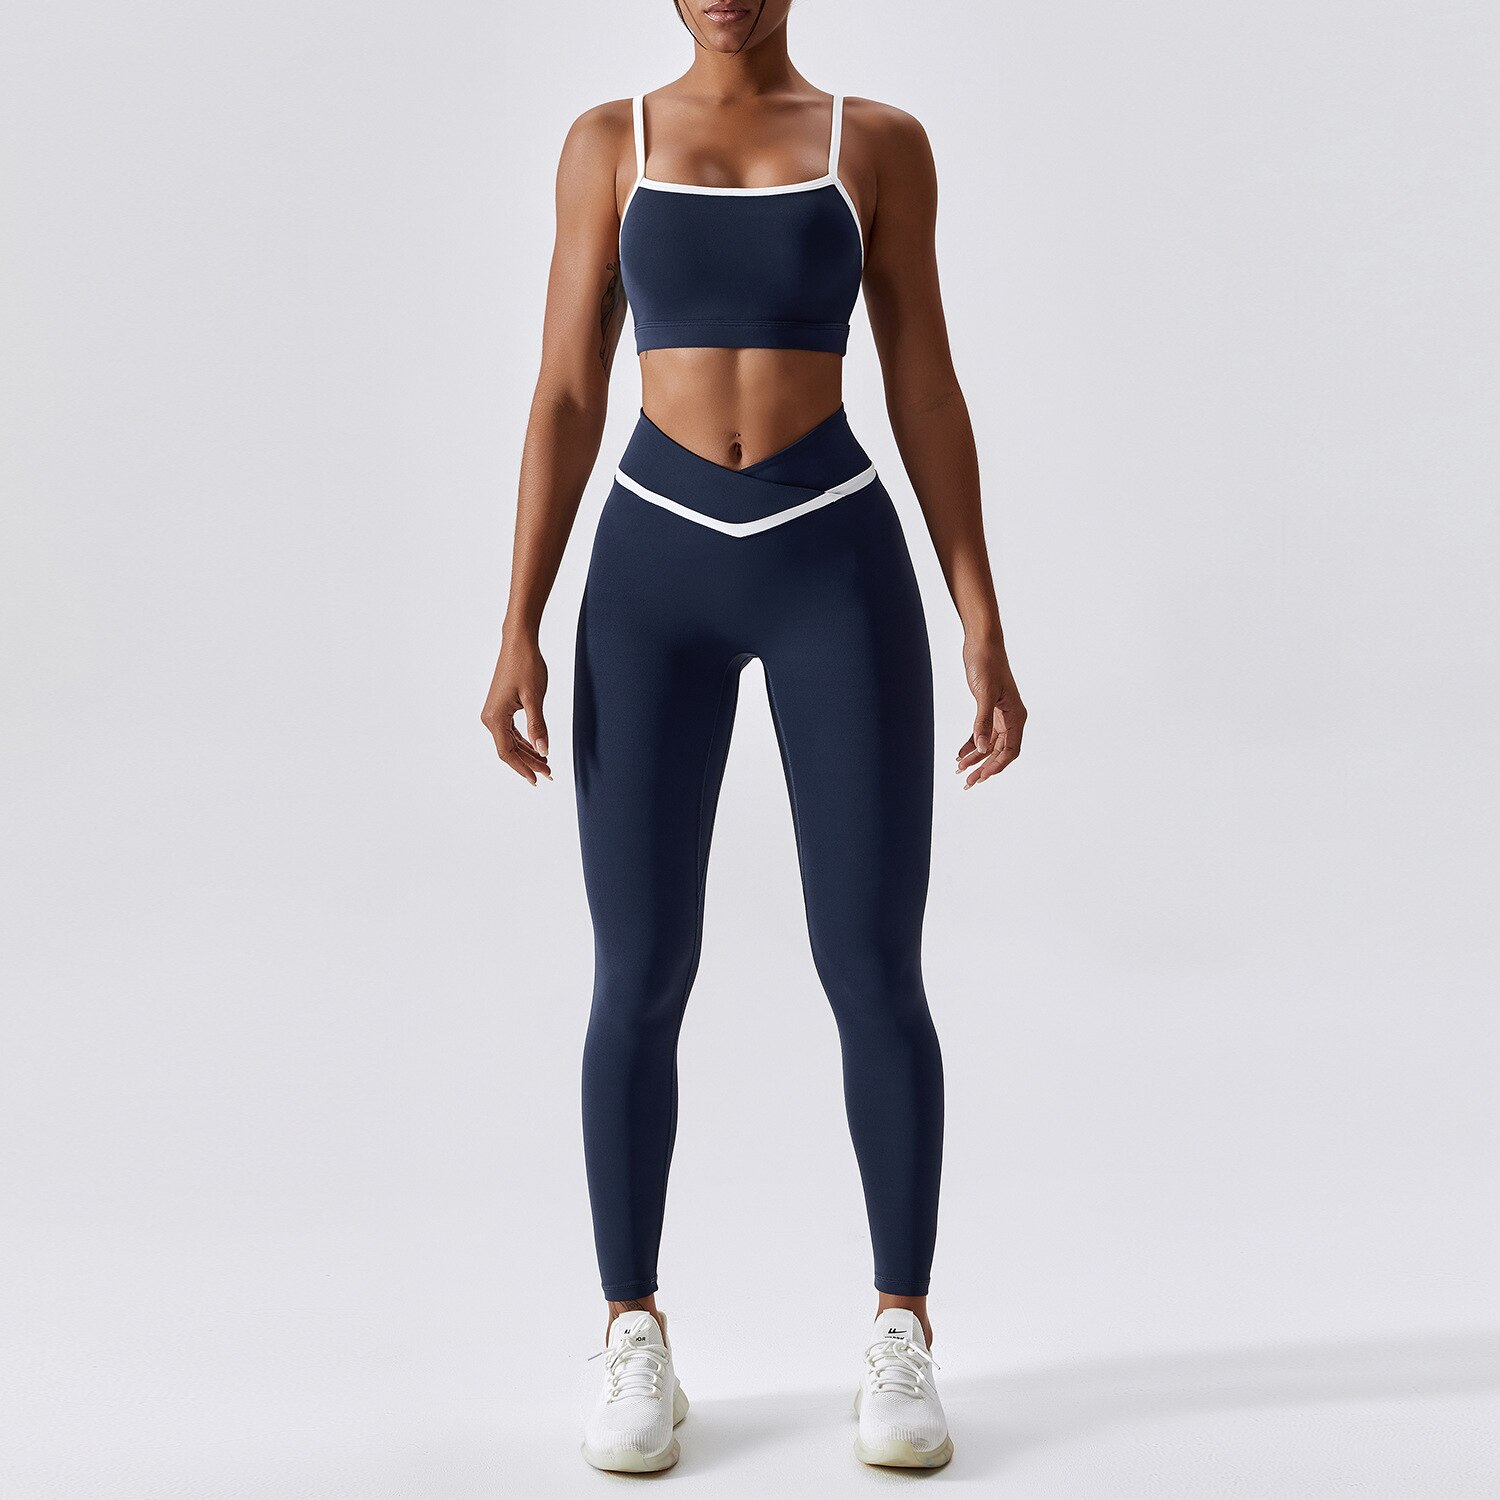 Yoga-Clothing-Sets-Women-High-Waist-Leggings-And-Top-Seamless-Tracksuit-Fitness-Workout-Outfits-Gym-Sports-4